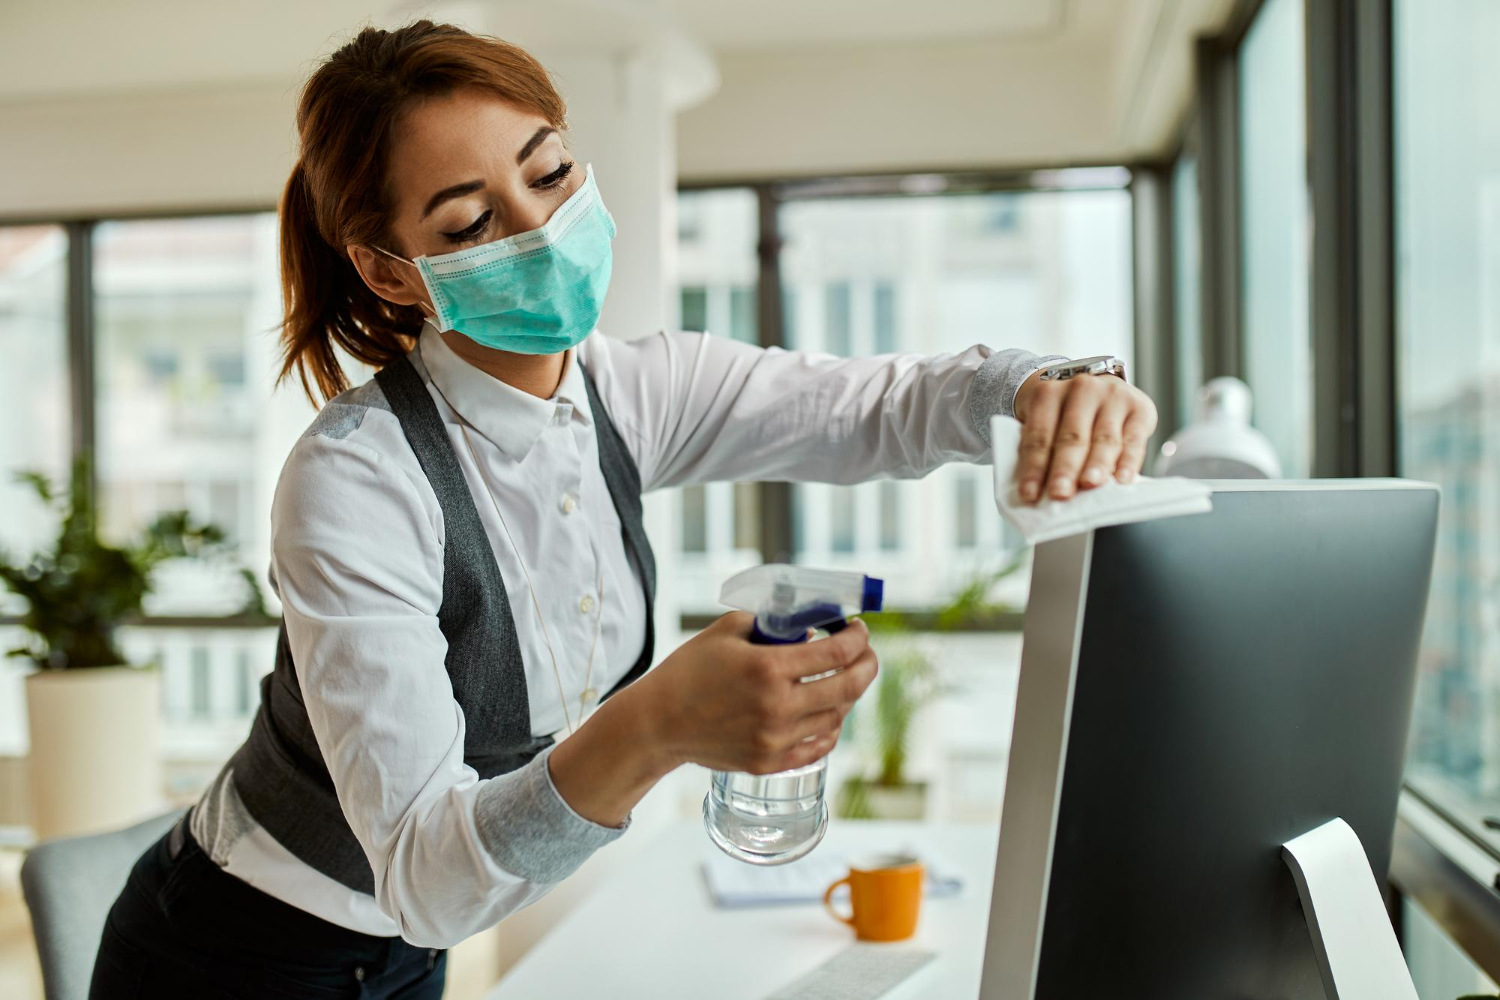 Hiring a Part-Time Cleaner is the Right Choice For Your Office